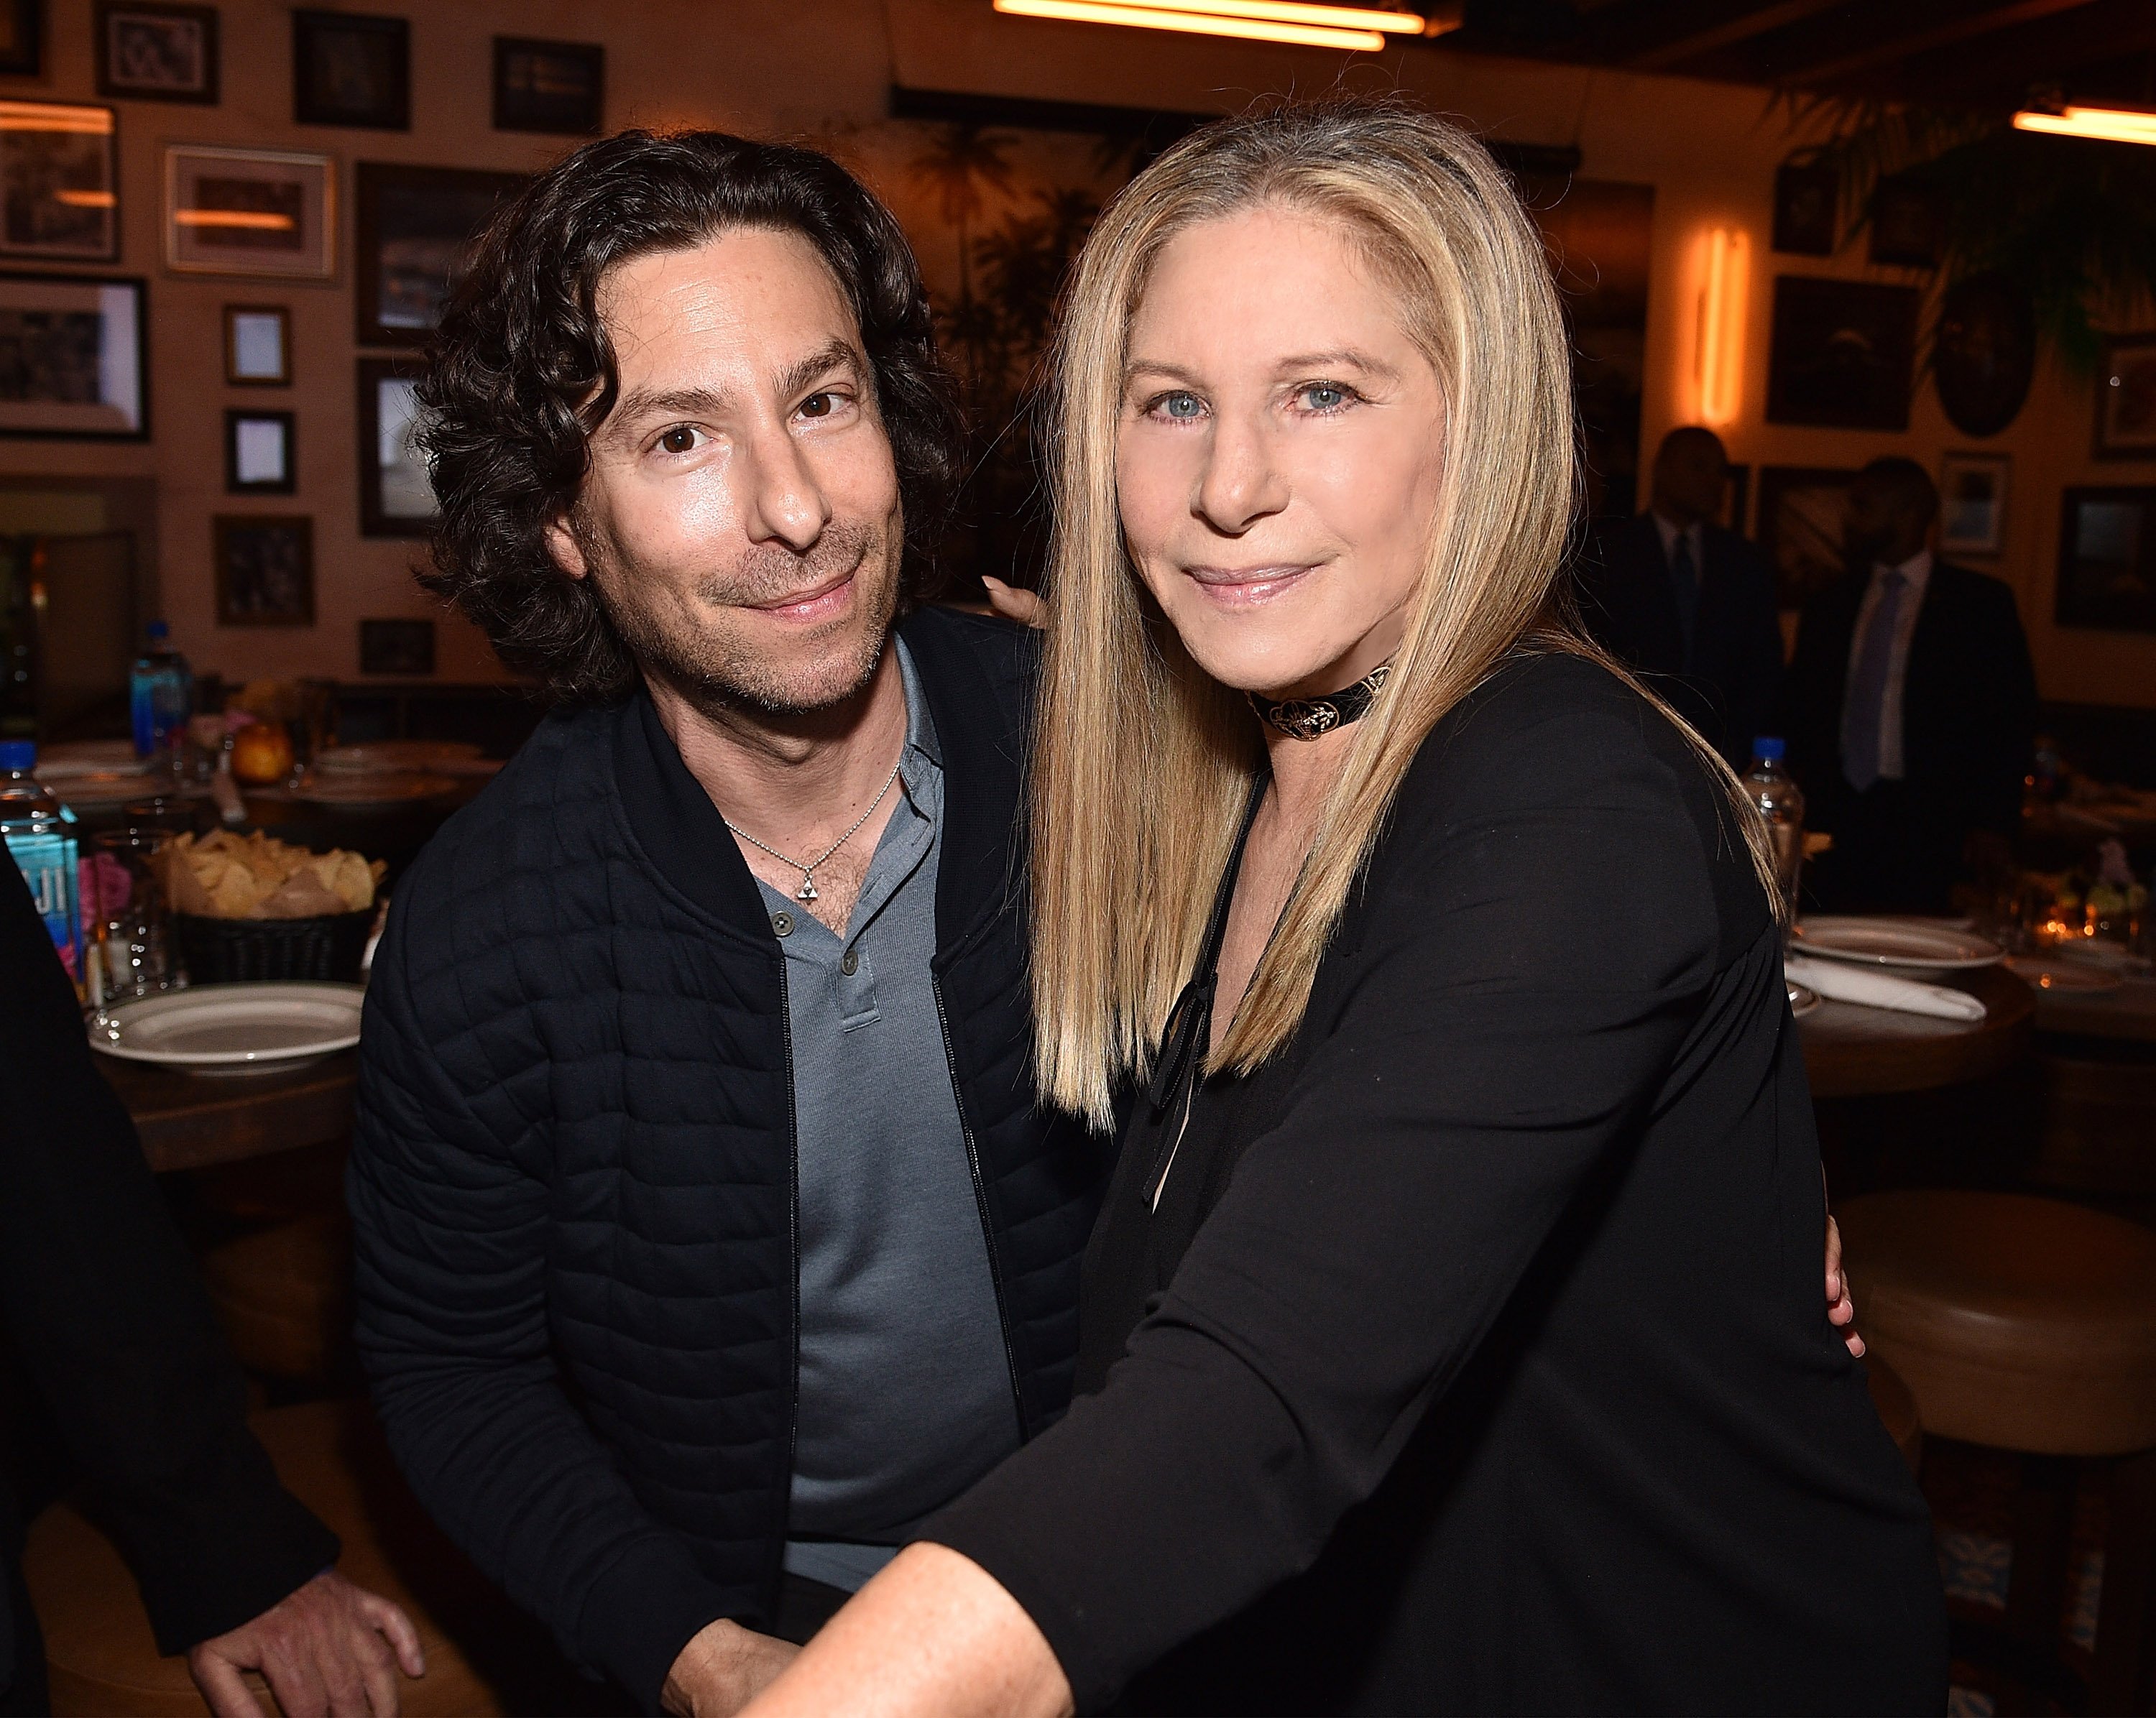 ason Gould and Barbra Streisand attend Barbra Streisand's 75th birthday at Cafe Habana on April 24, 2017 in Malibu, California. | Source: Getty Images